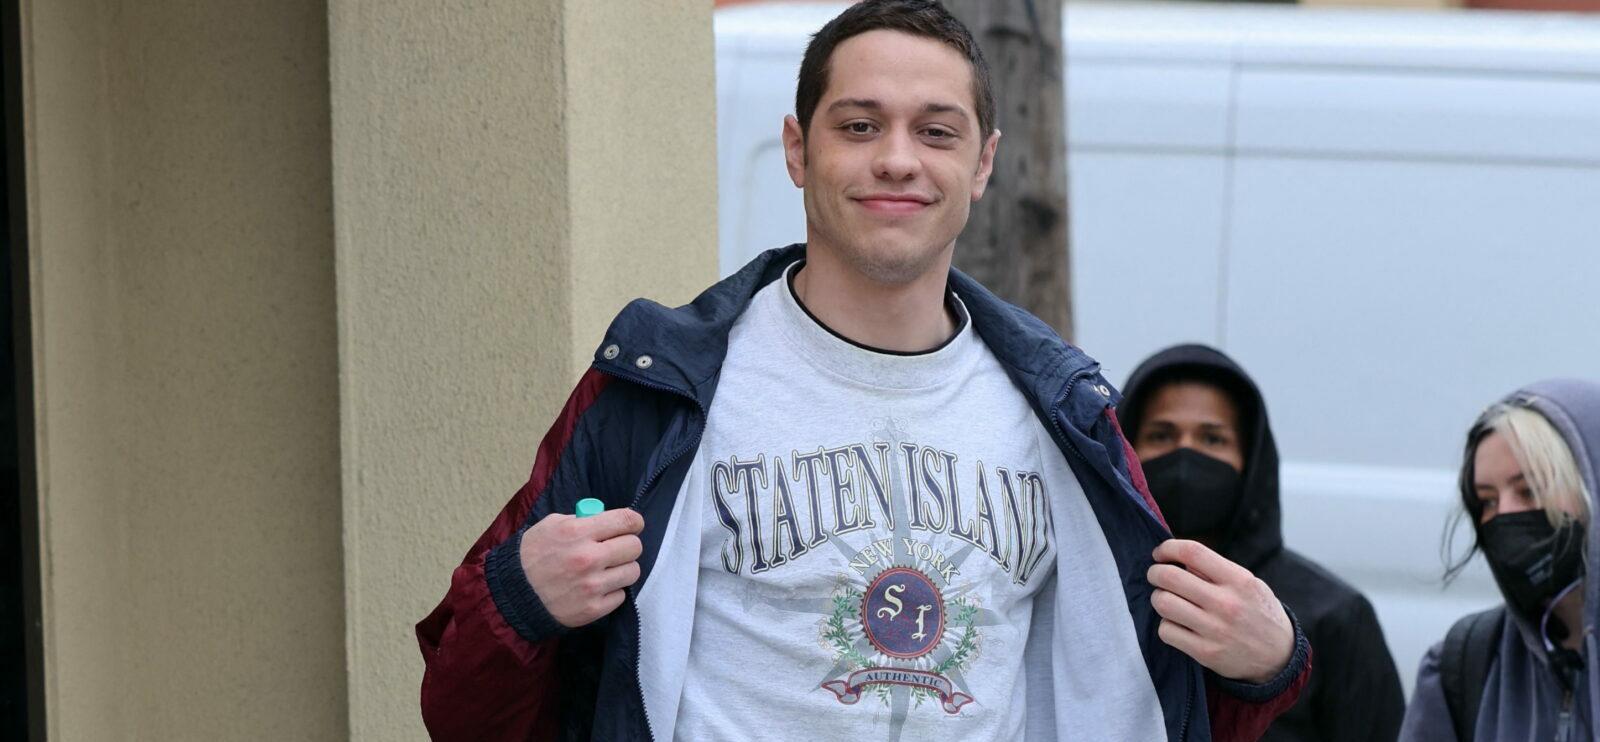 Pete Davidson’s ‘Inner Circle’ Allegedly Concerned For His Well-being And ‘Fear He Could Die’